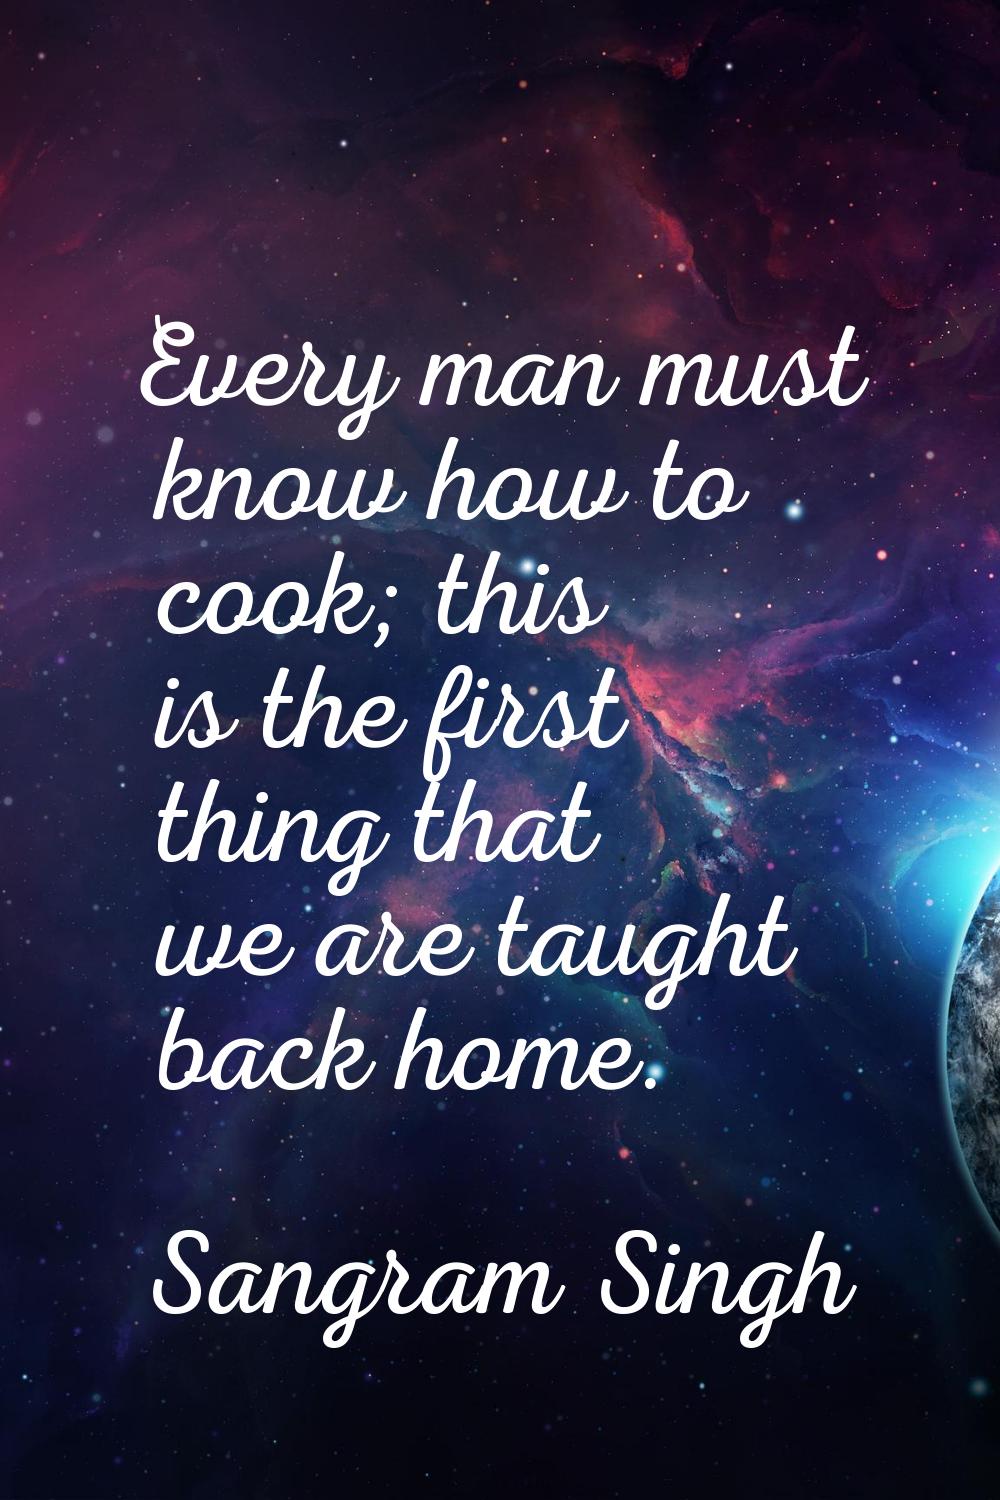 Every man must know how to cook; this is the first thing that we are taught back home.